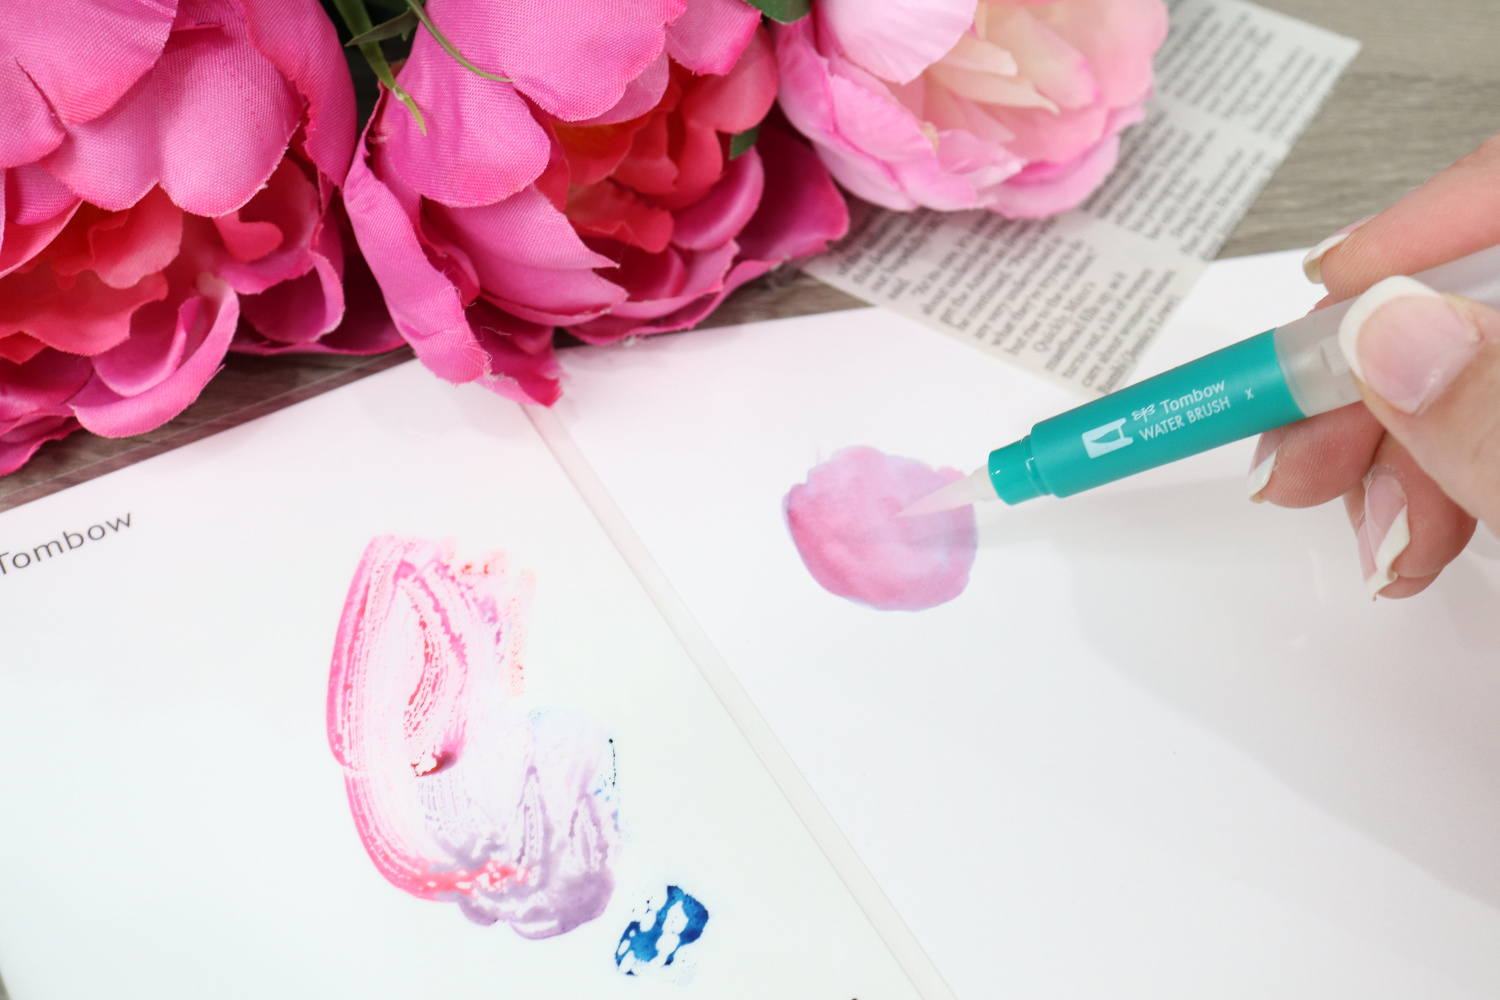 Image contains Amy’s hand holding a Water Brush and using it to paint an irregular purple shape on a piece of white Bristol board. A blending palette with blue and red ink mixed together sits in the foreground. Faux pink peonies and a newspaper clipping sit in the background.